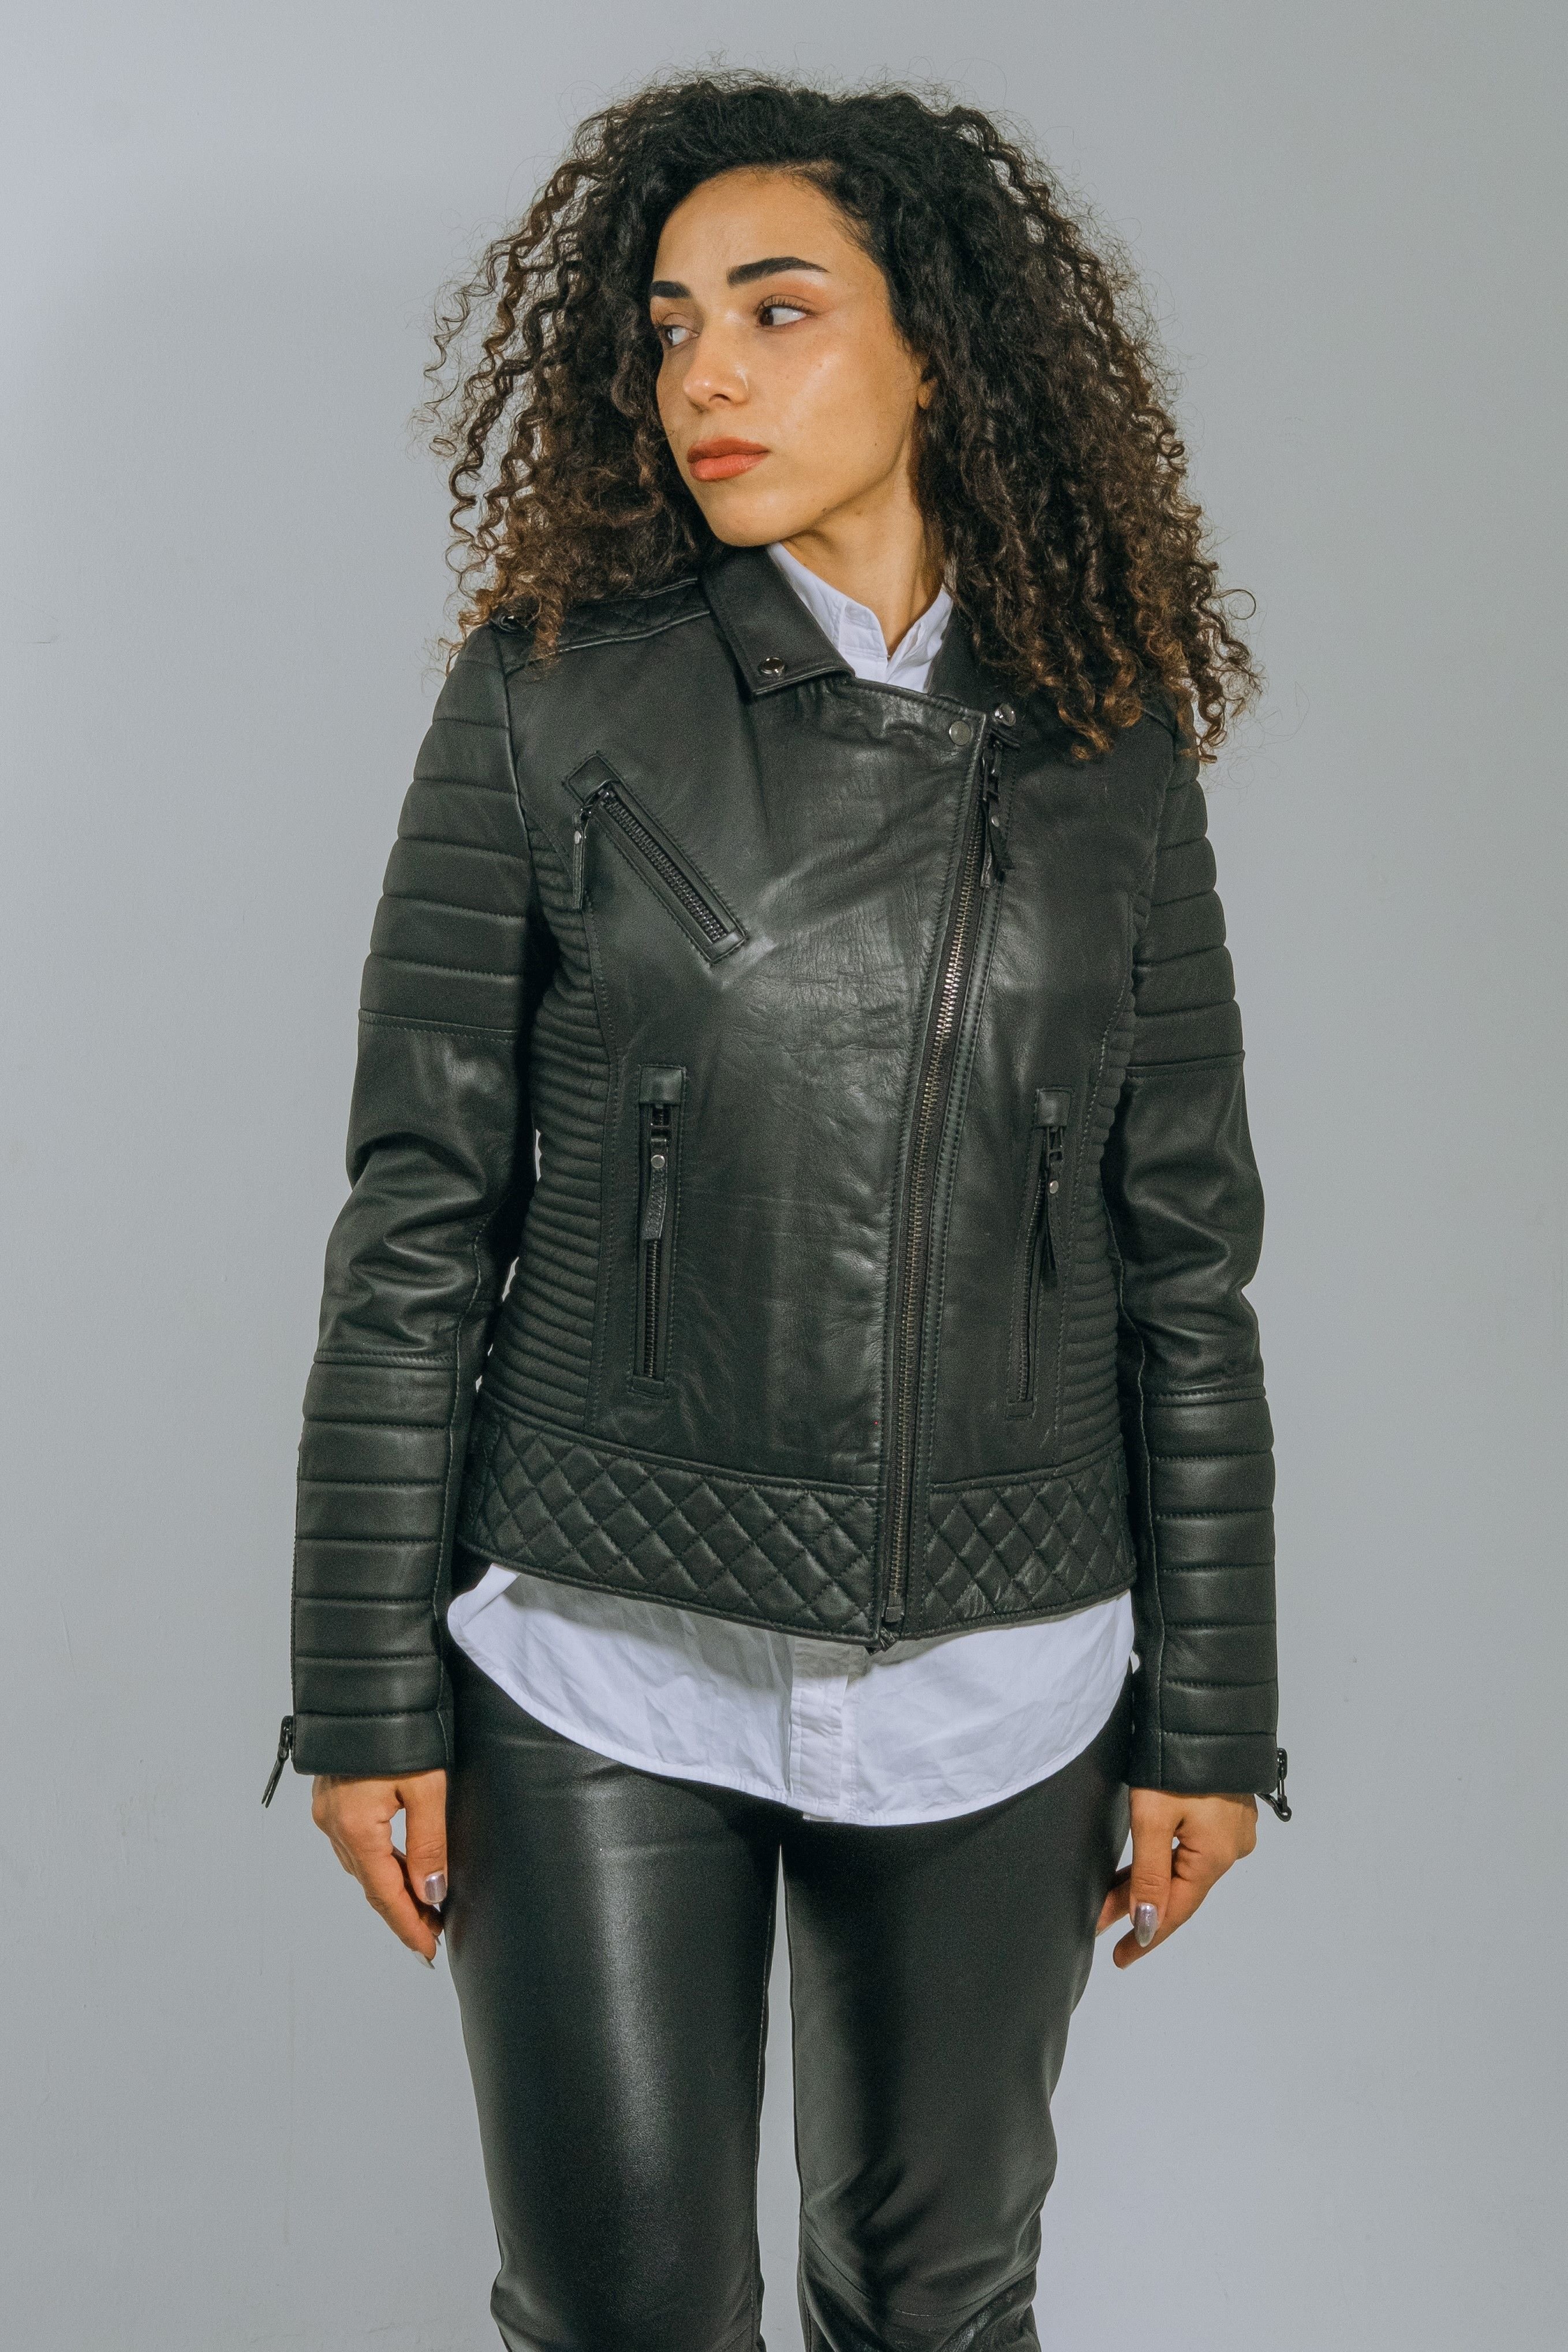 Biker Style Black Genuine Leather Jacket for Women Perfect Gift for Her Get Ready to Ride in Style with Venice